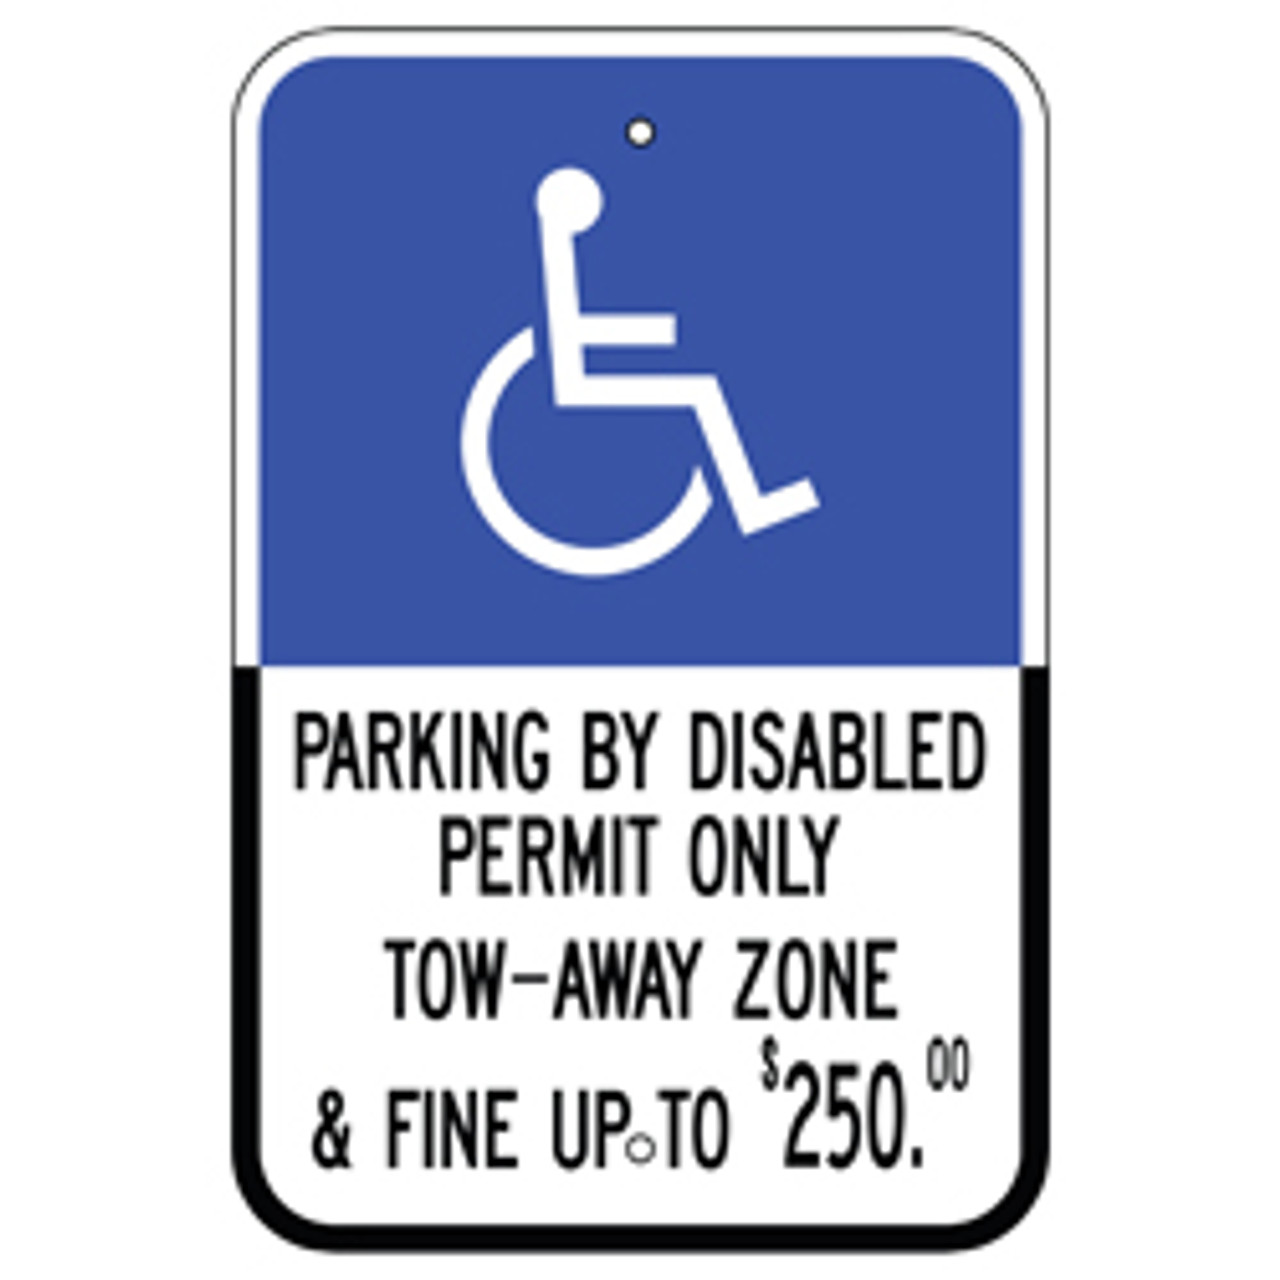 Florida Handicap Parking Sign - Parking by Disabled Permit Only - $250